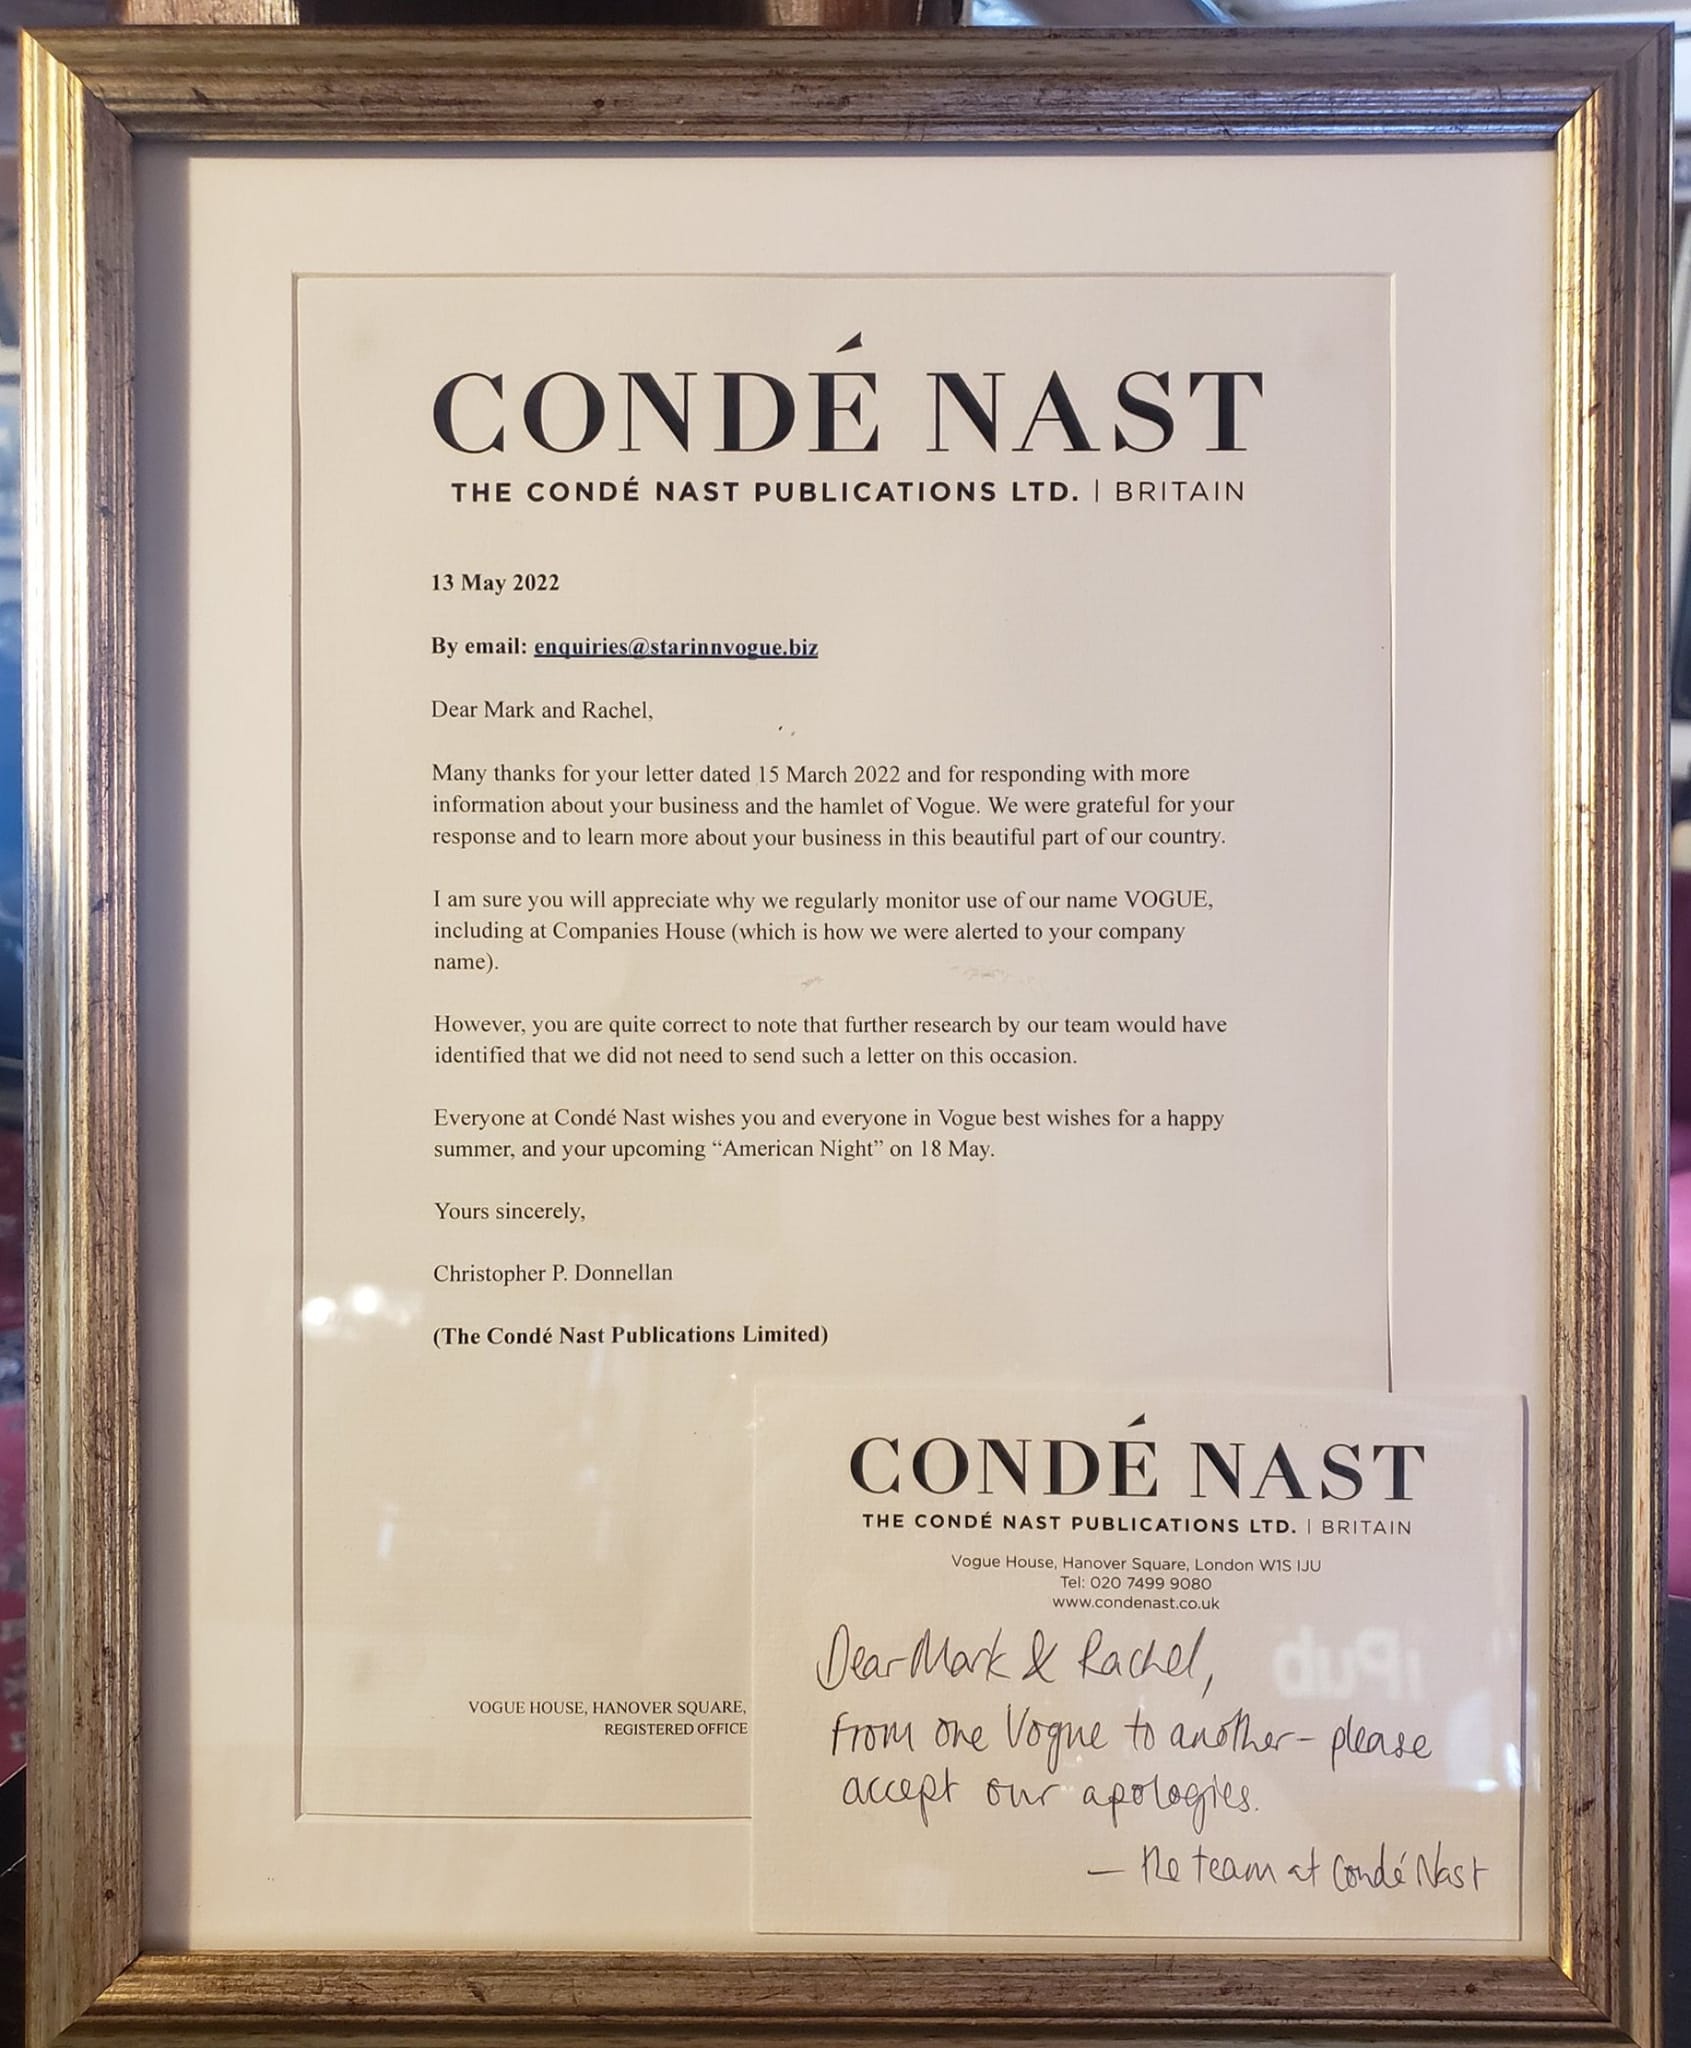 A framed letter from Vogue publishers Conde Nast